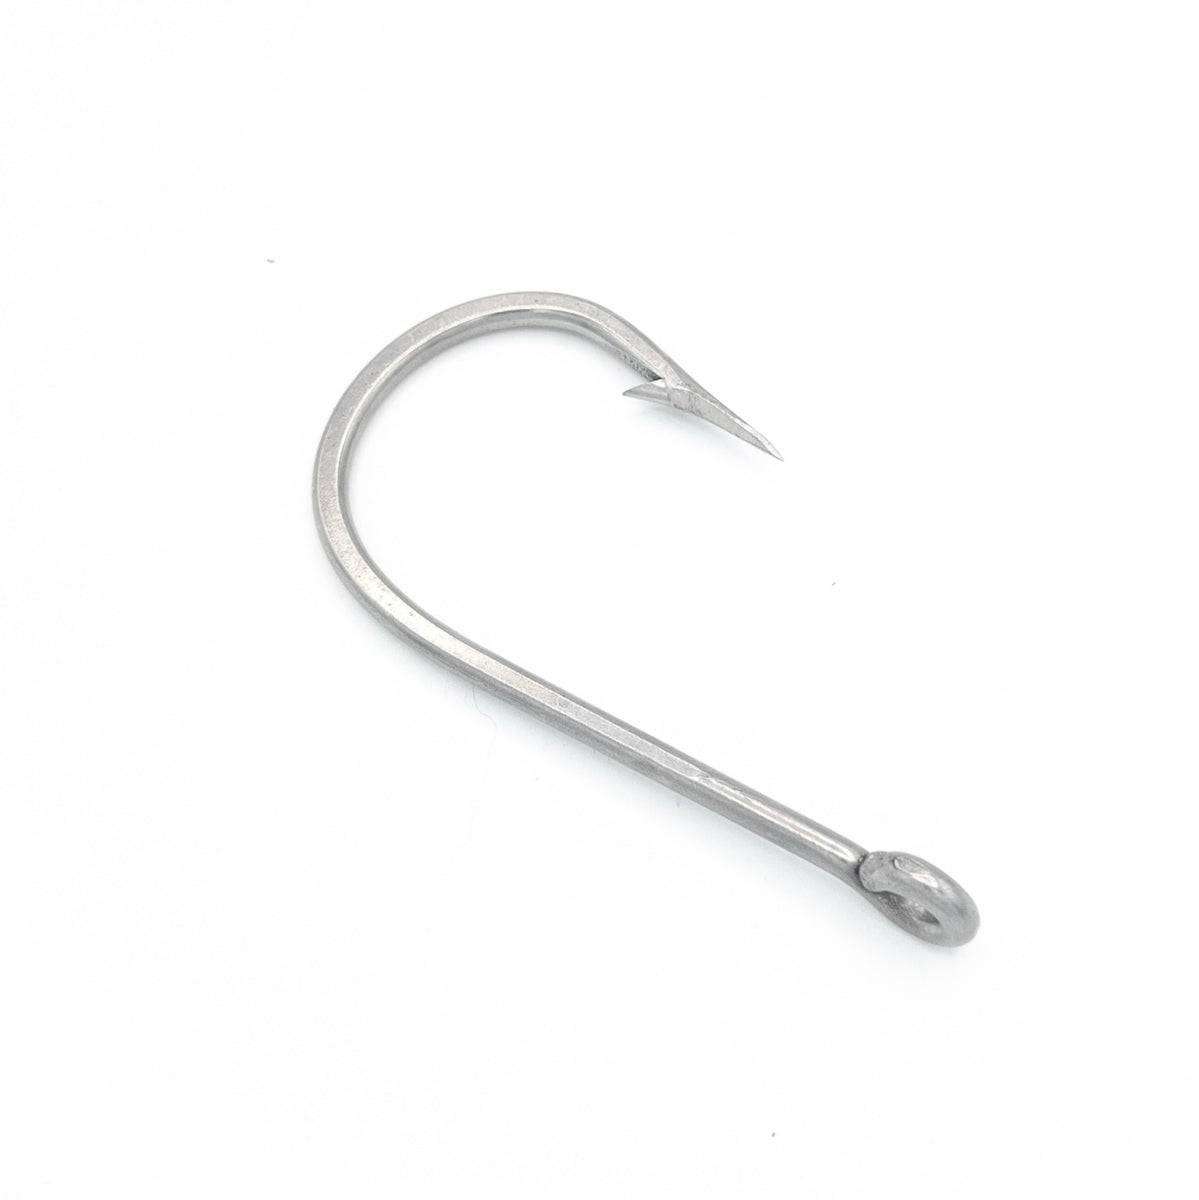 SouthBend Size 2 Bronze Treble Fishing Hook (4-Pack) - Anderson Lumber